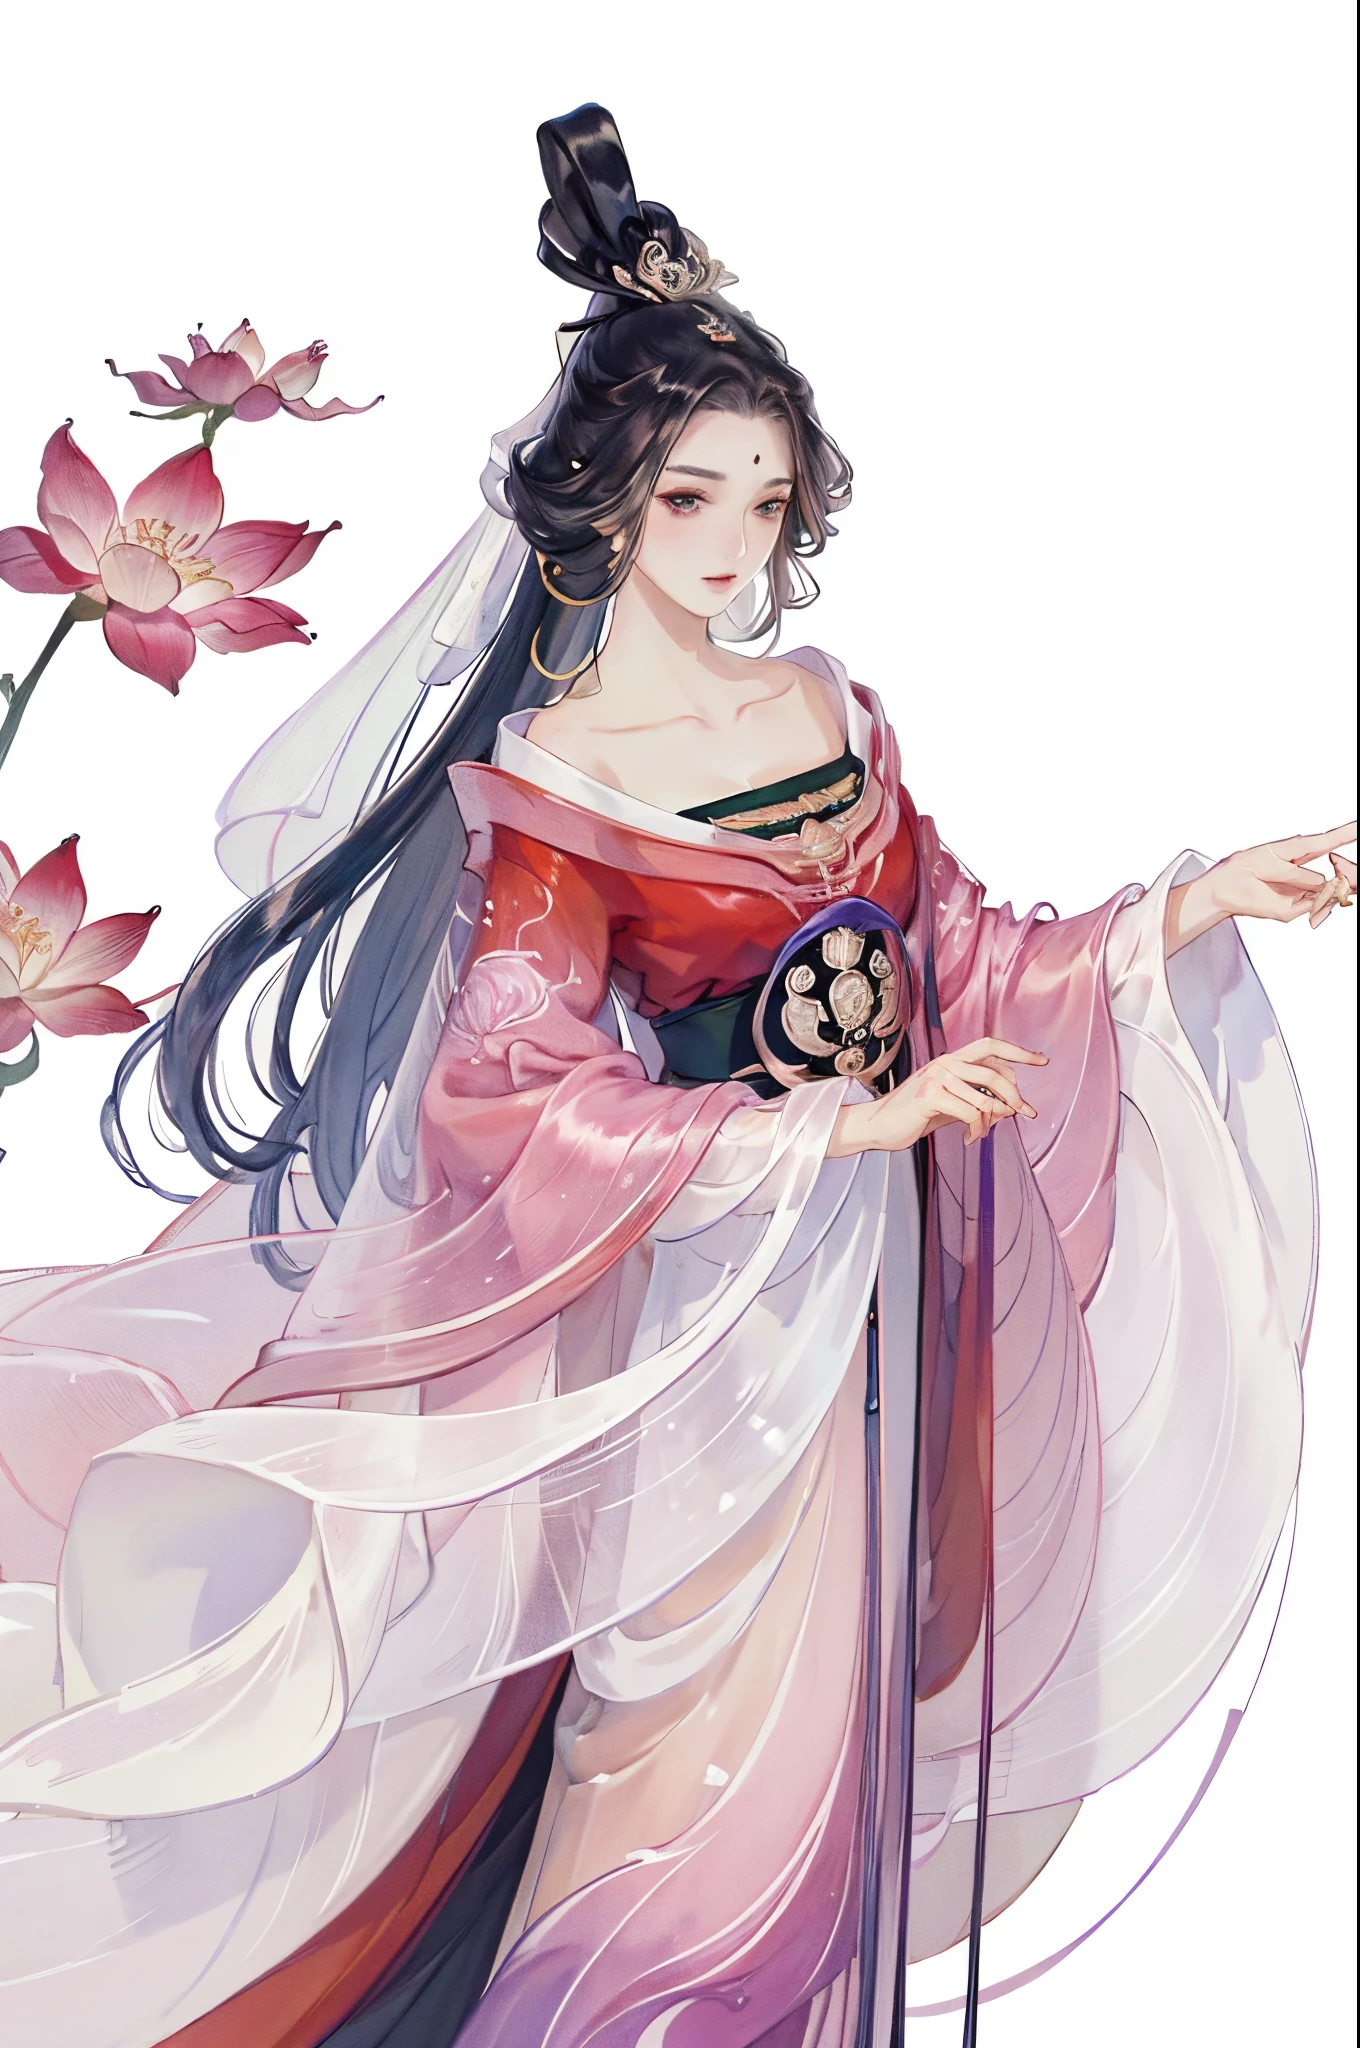 (((tmasterpiece, Best quality, Ultra-high resolution, CG unified 8K wallpaper, Best quality at best, ultra - detailed, ultra HD picture quality))), 1 girl, cabelos preto e longos, game fairy, Lotus lotus leaf decoration, Redcoat, Hanfu, yarn, flowing gauze, jewely, ((Colorful)), Nice face, beautidful eyes, Beautiful hairstyle, Beautiful costumes, Structurally sound